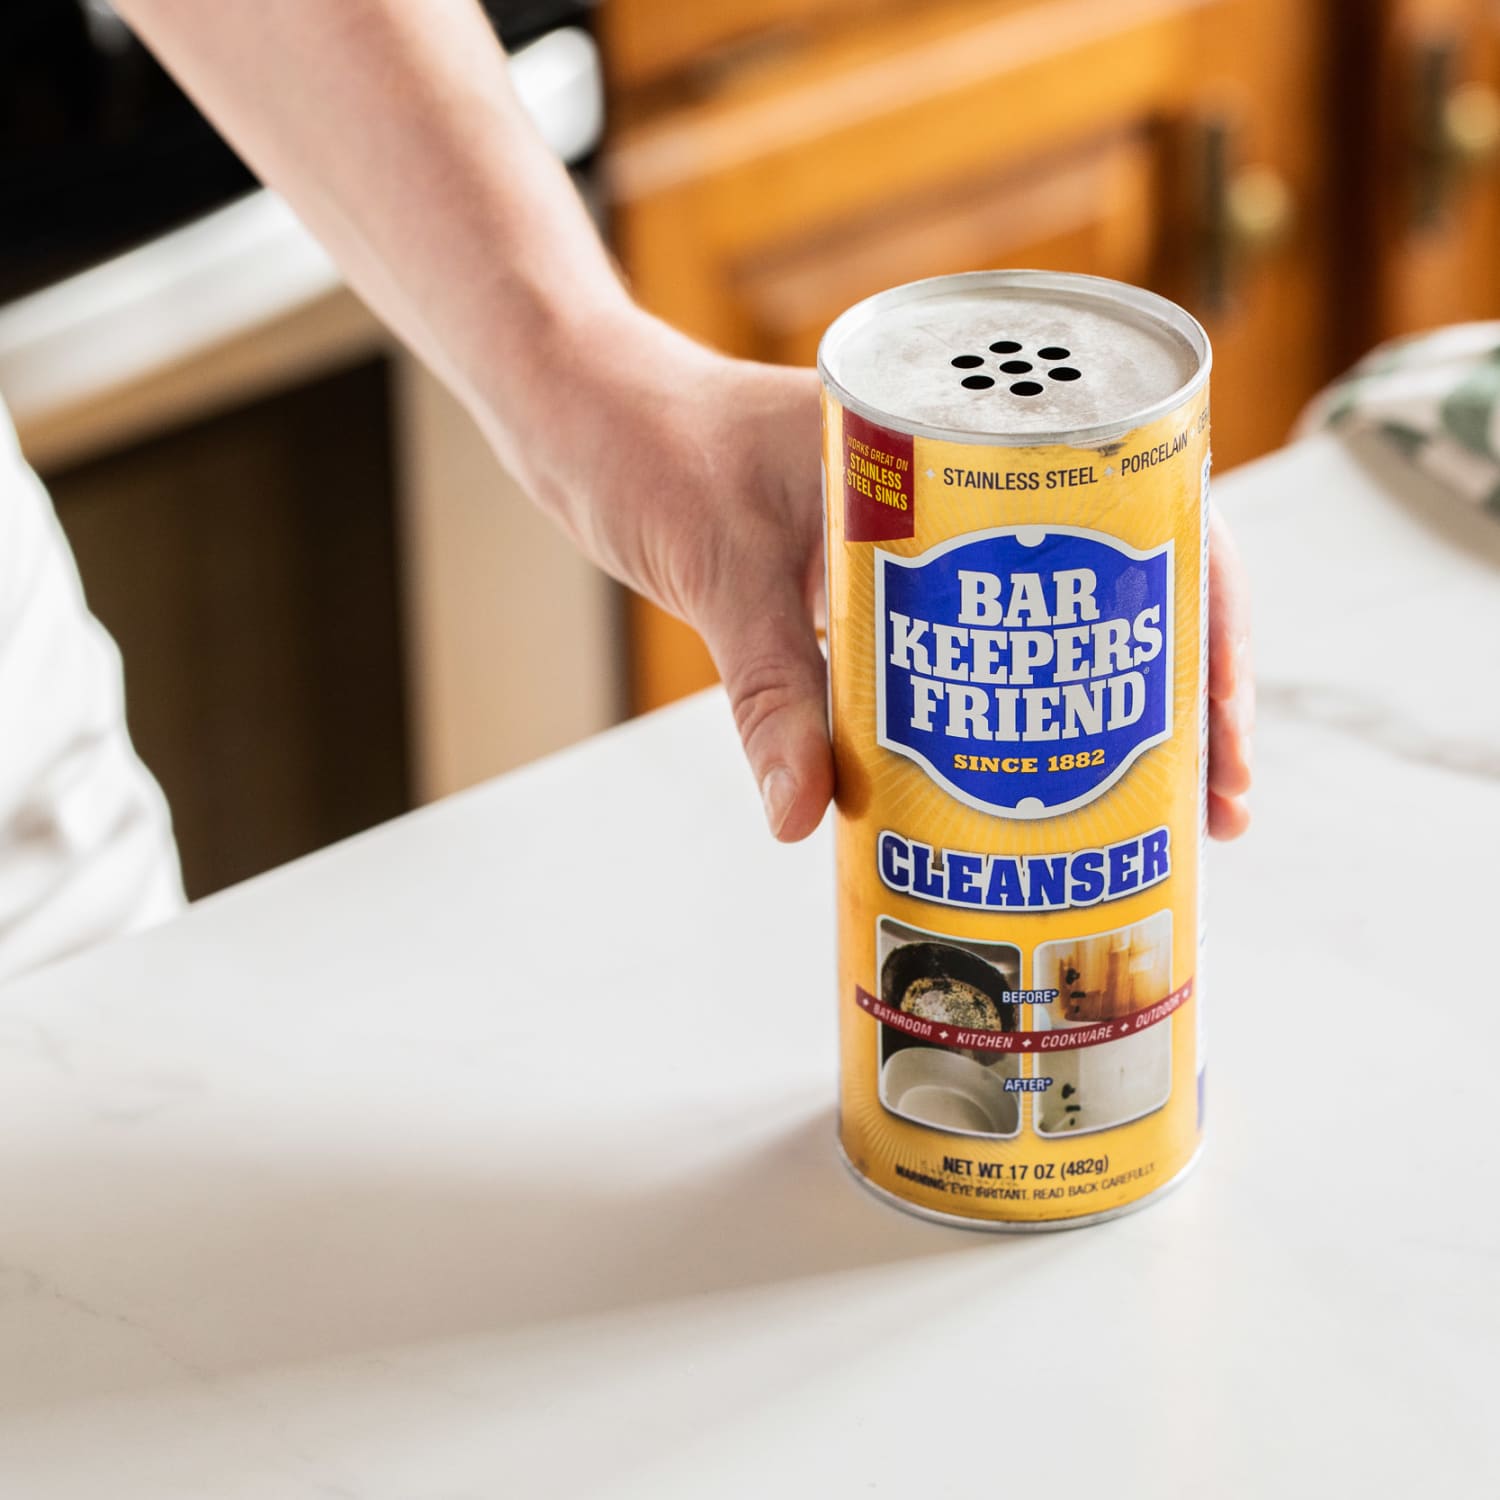 How to Clean a Tea Kettle with BKF - Bar Keepers Friend